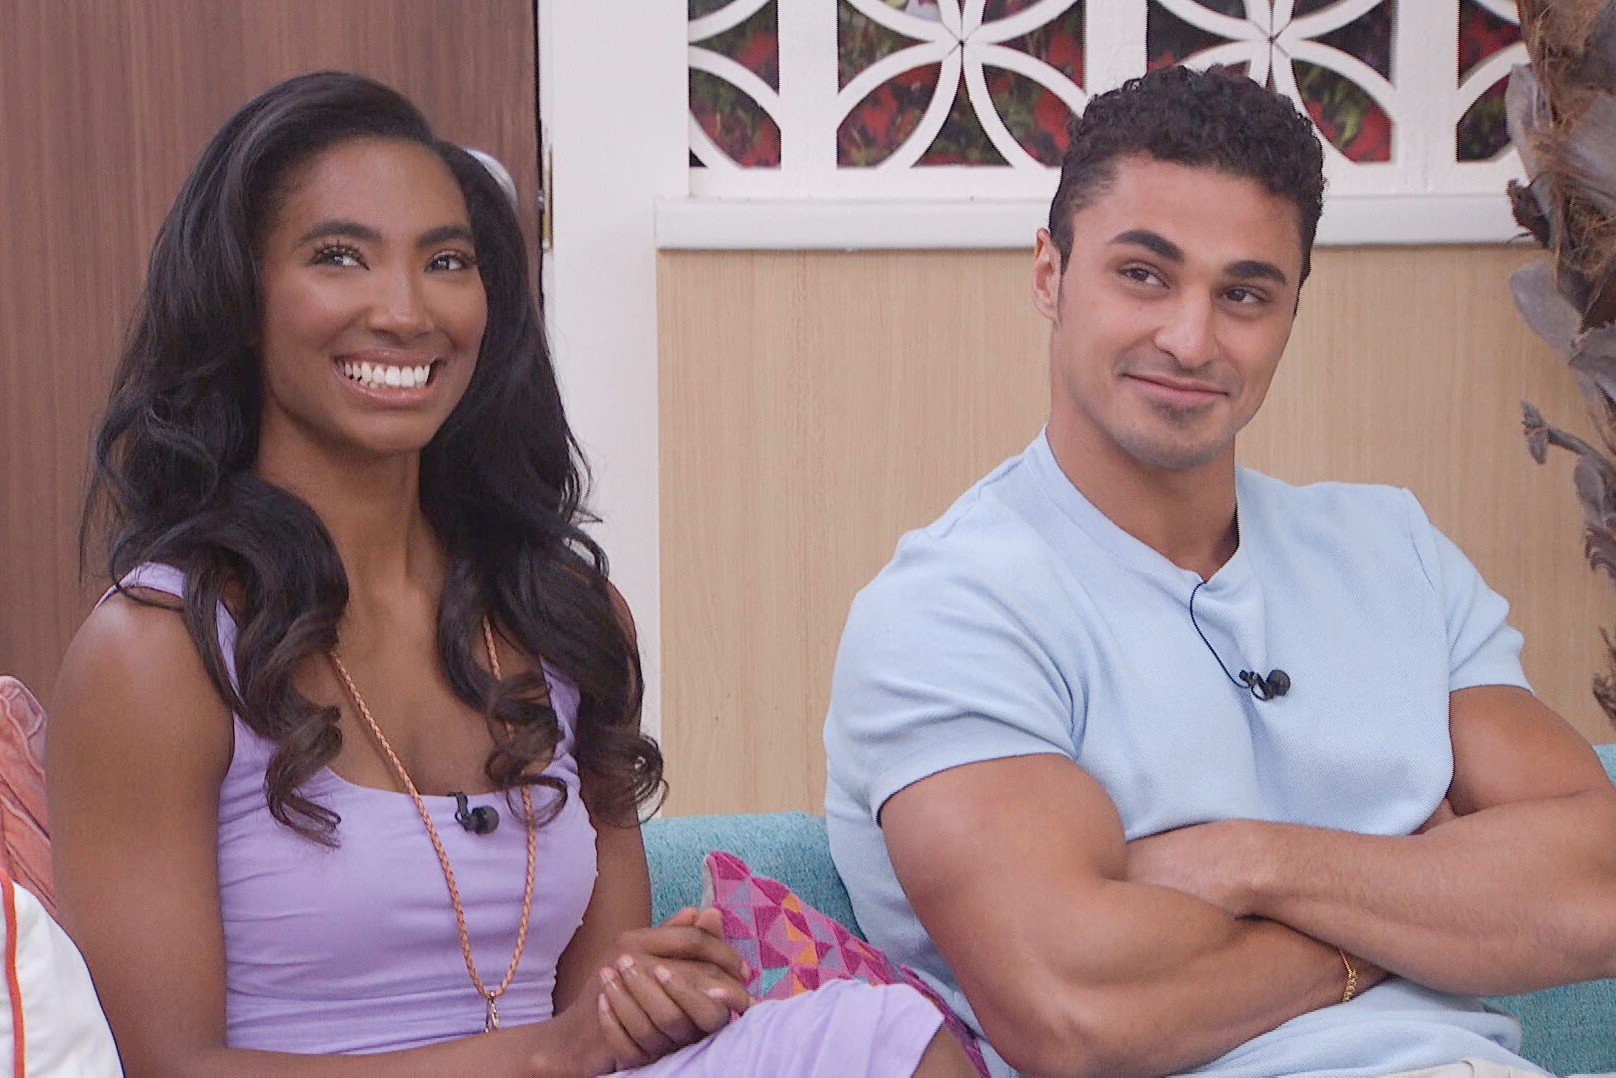 Taylor Hale and Joseph Abdin, who starred in 'Big Brother 24' on CBS, sit next to one another on a couch.